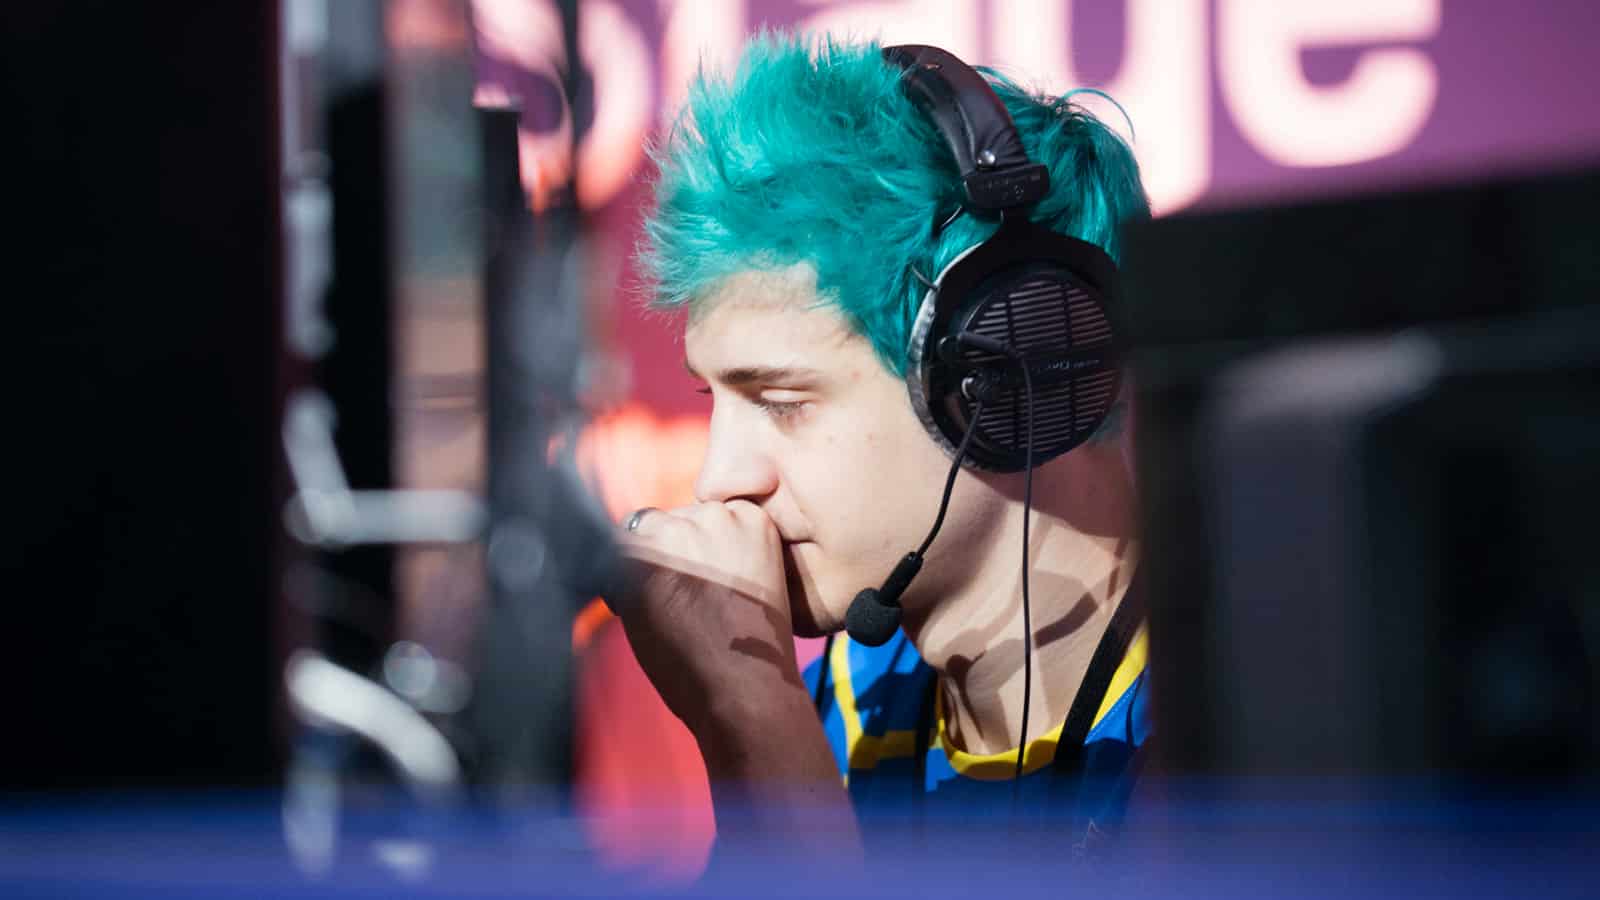 Ninja plays Fortnite on-stage at World Cup.